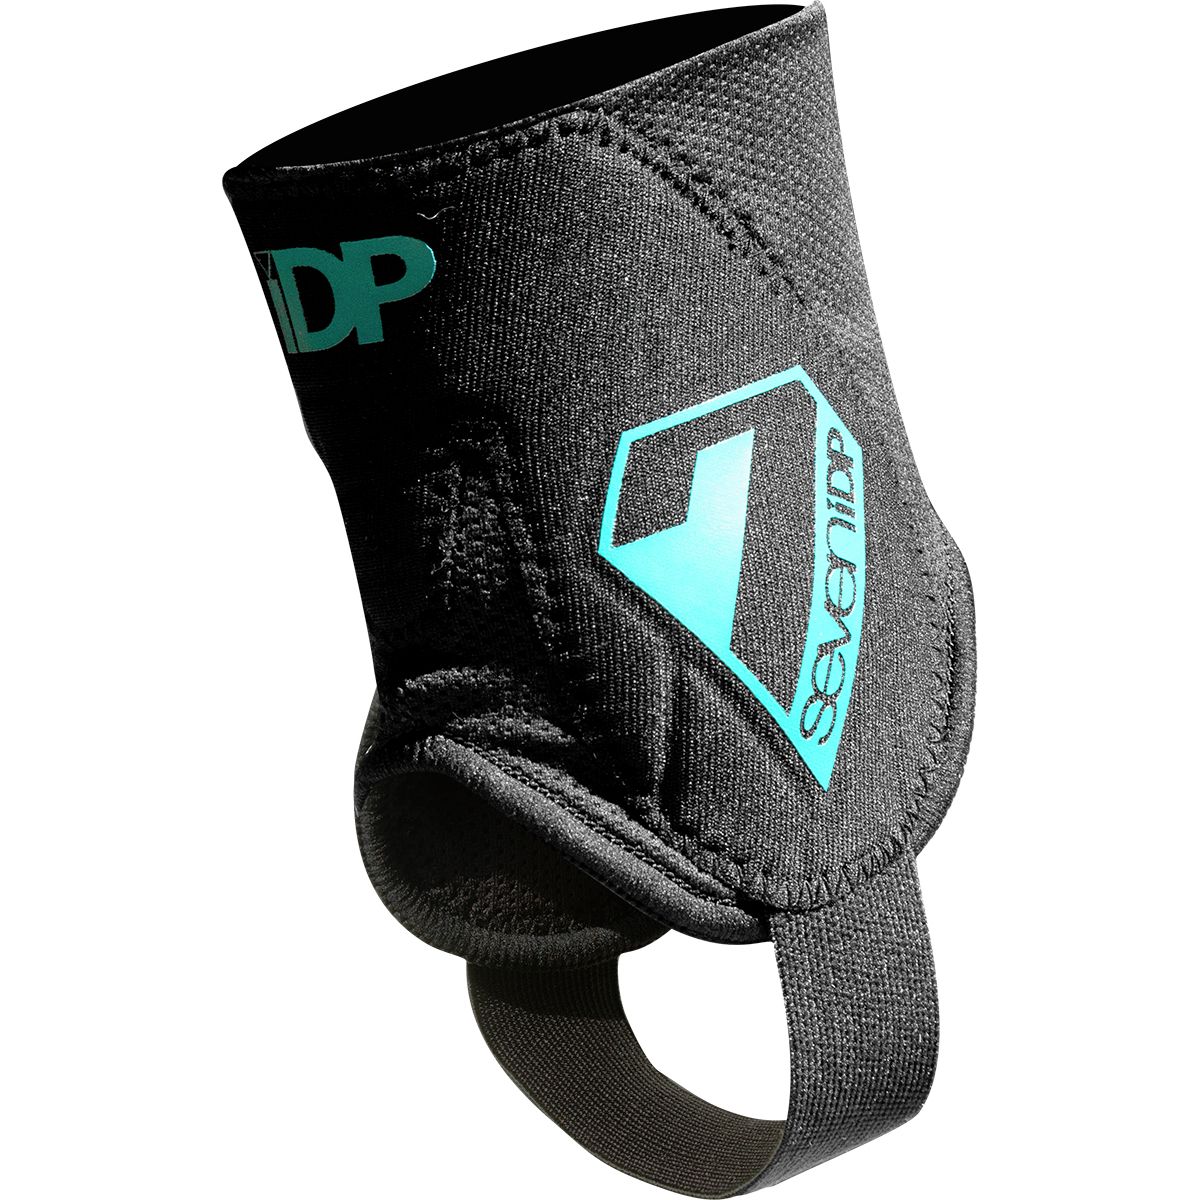 7 Protection Control Ankle Pad